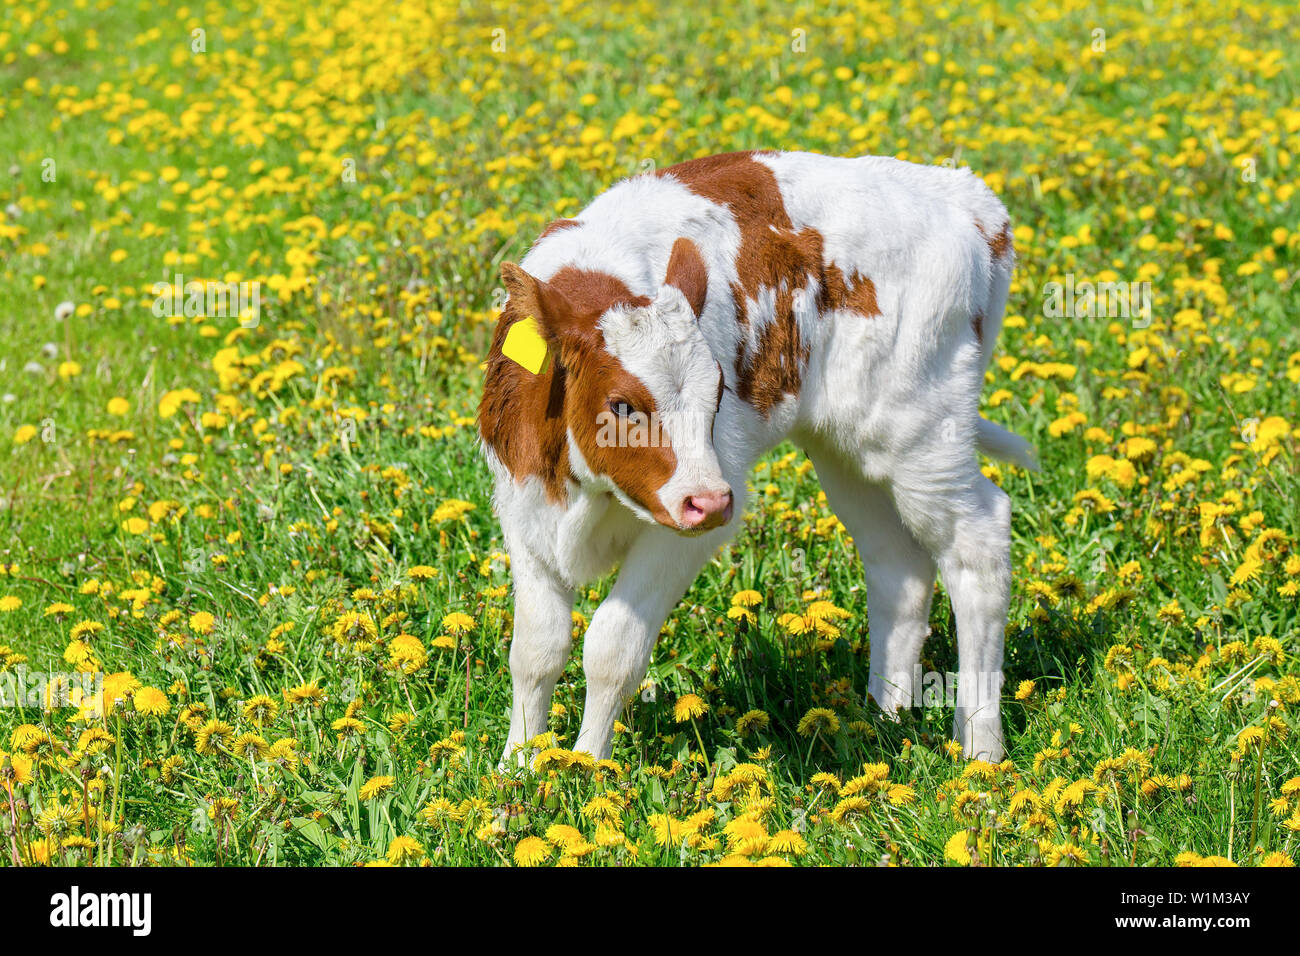 Newborn calf stands in dutch meadow with flowering yellow dandelions Stock Photo